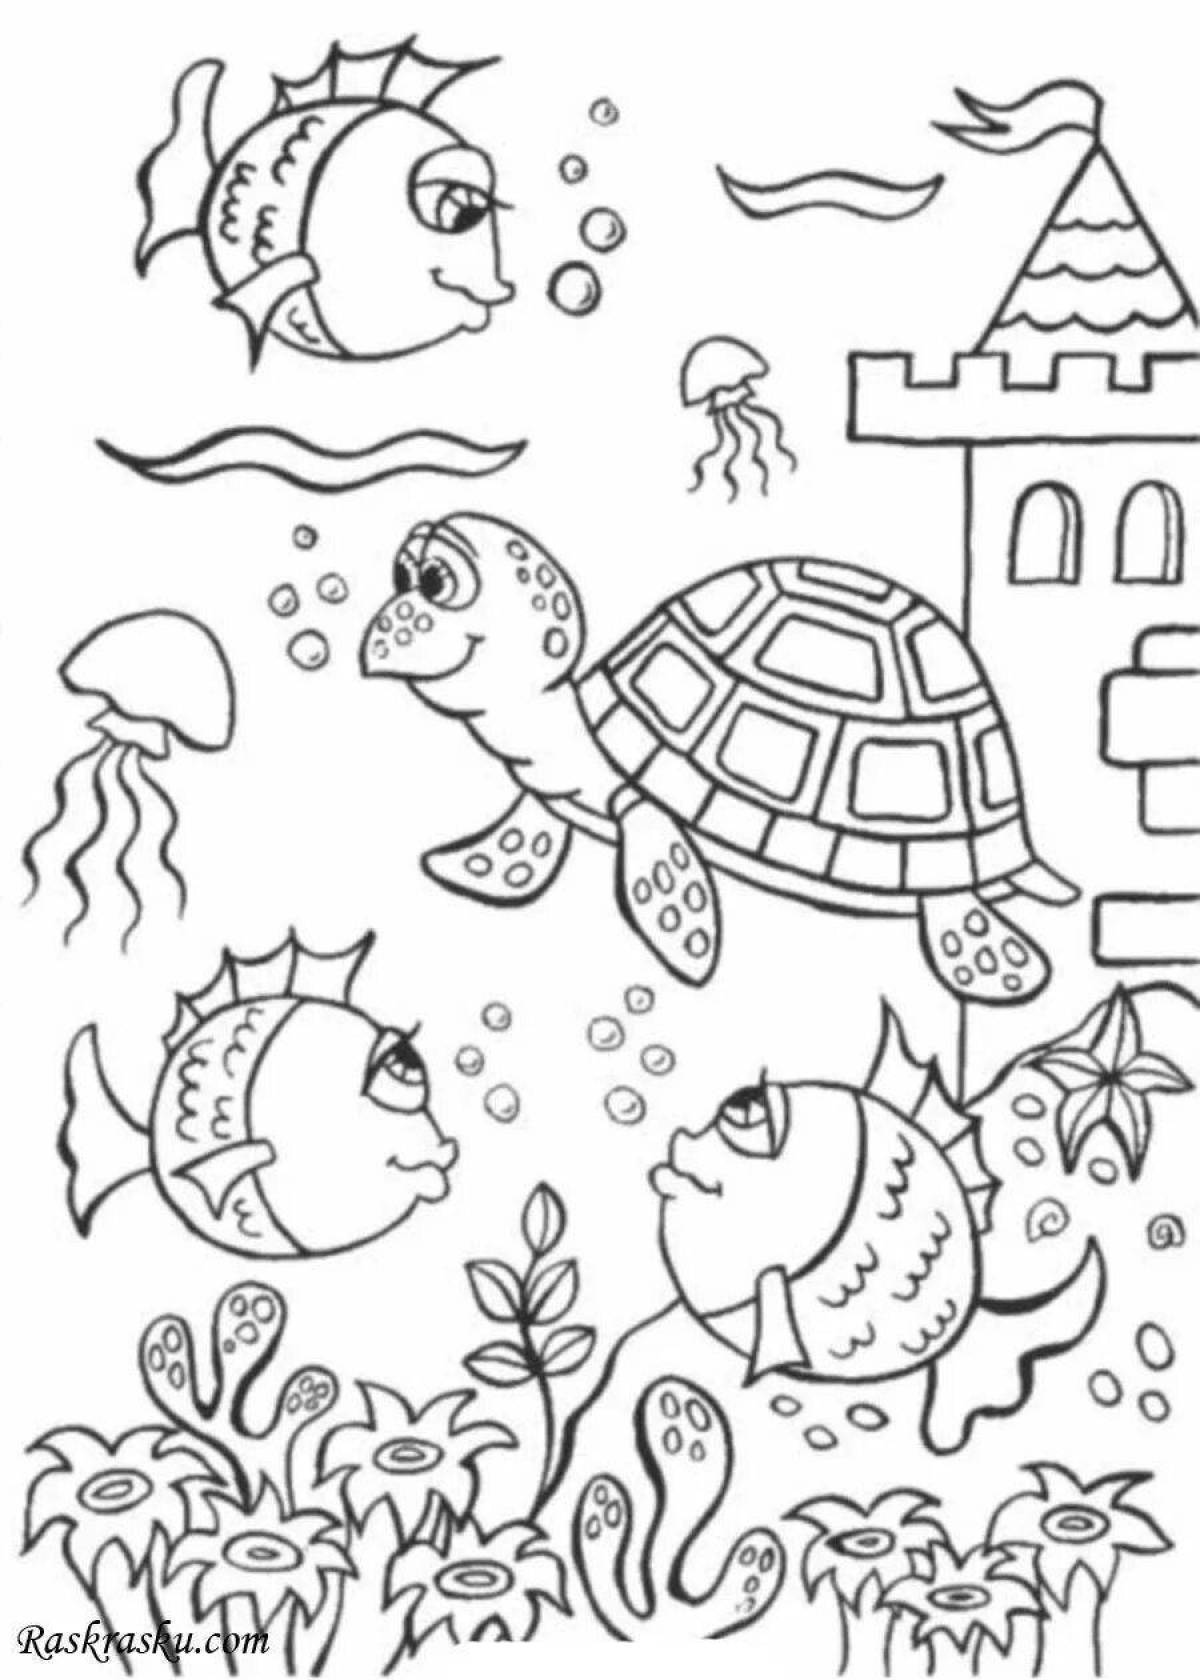 Coloring playful water world